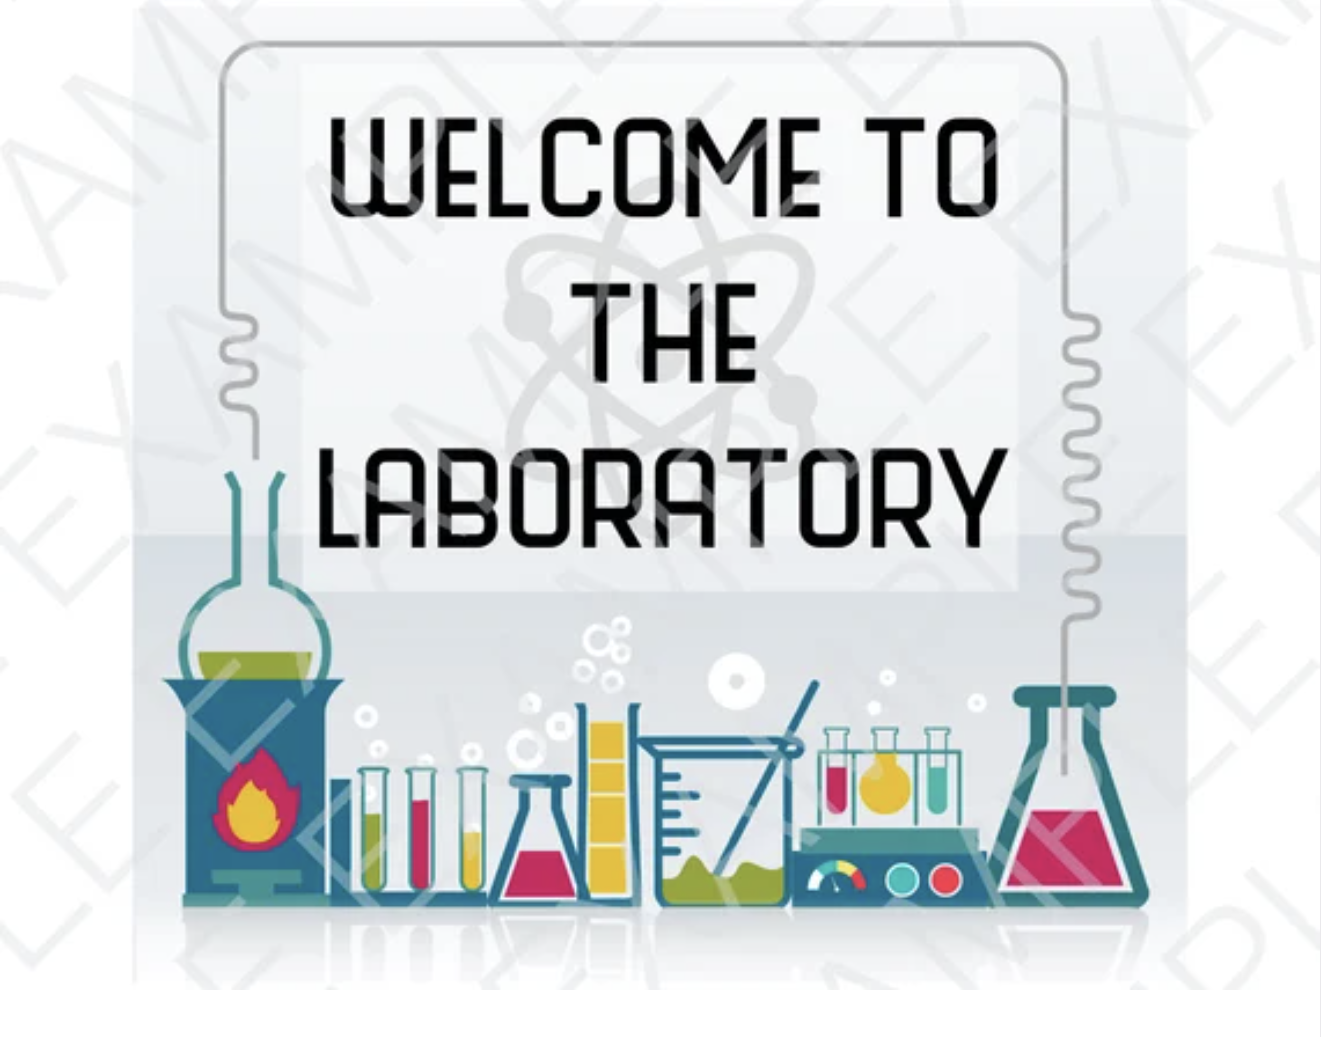 New members join the lab!